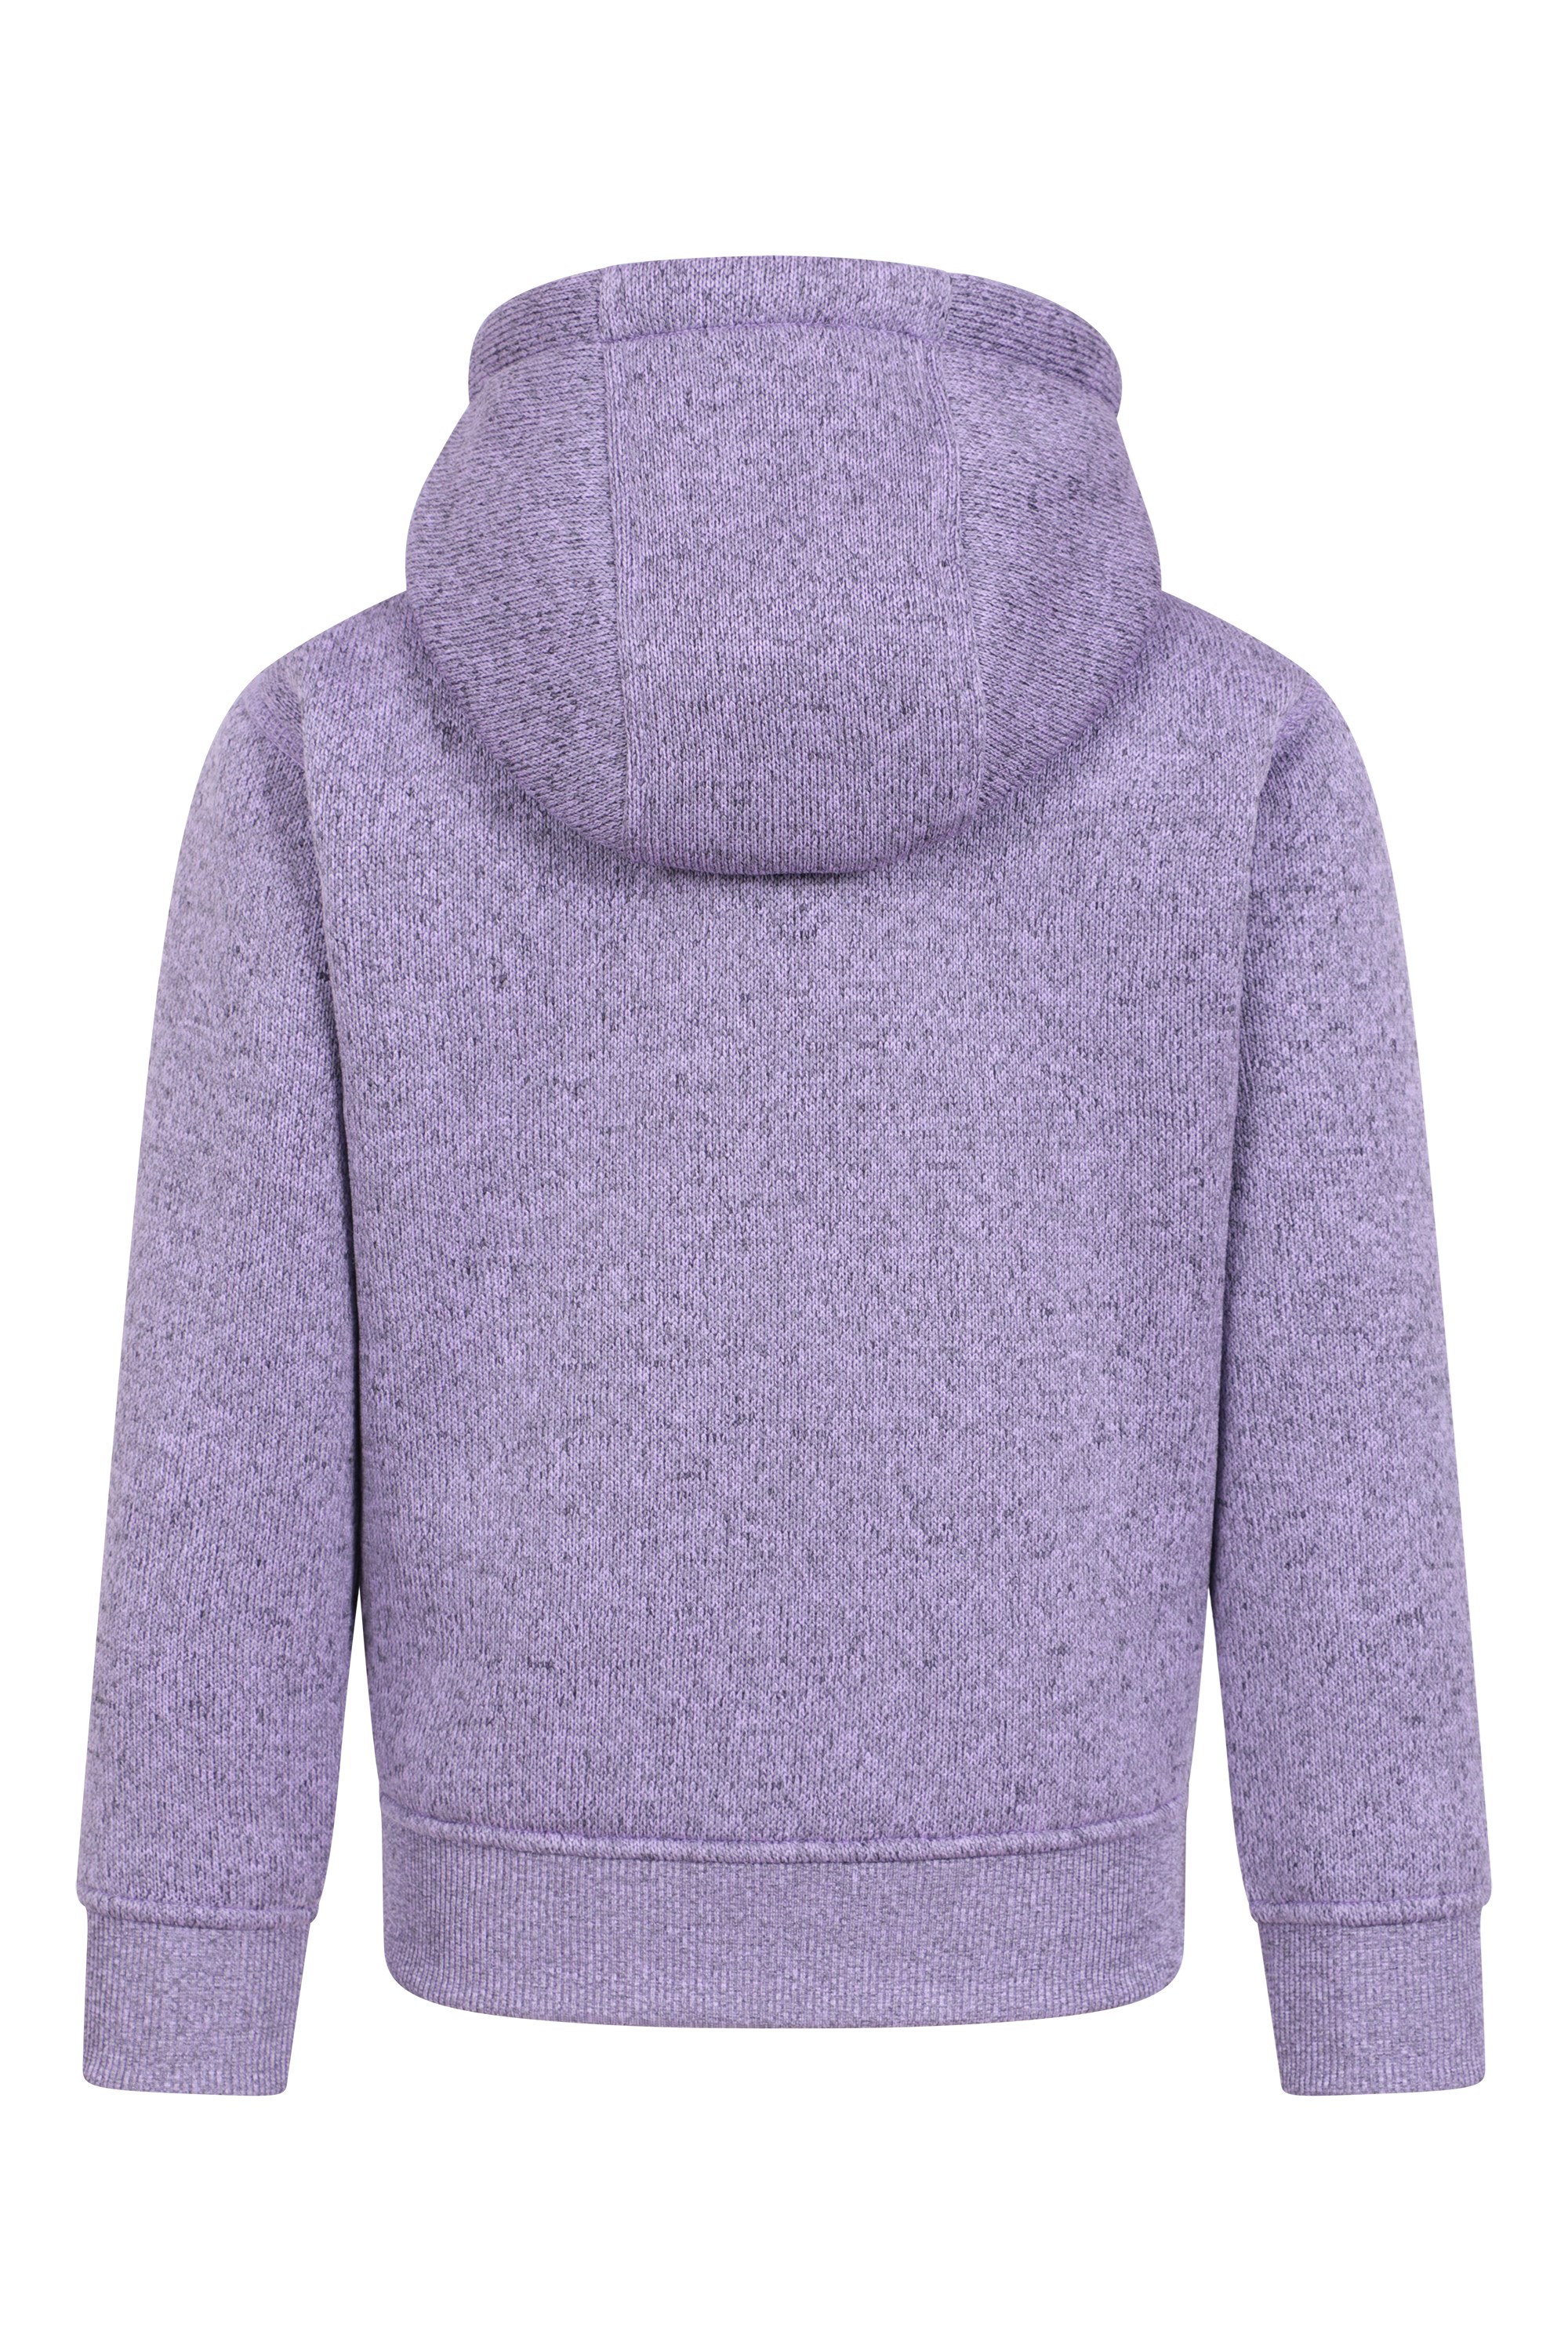 Youth Real Work Periwinkle Hoodie Large (Size 14) - NWT